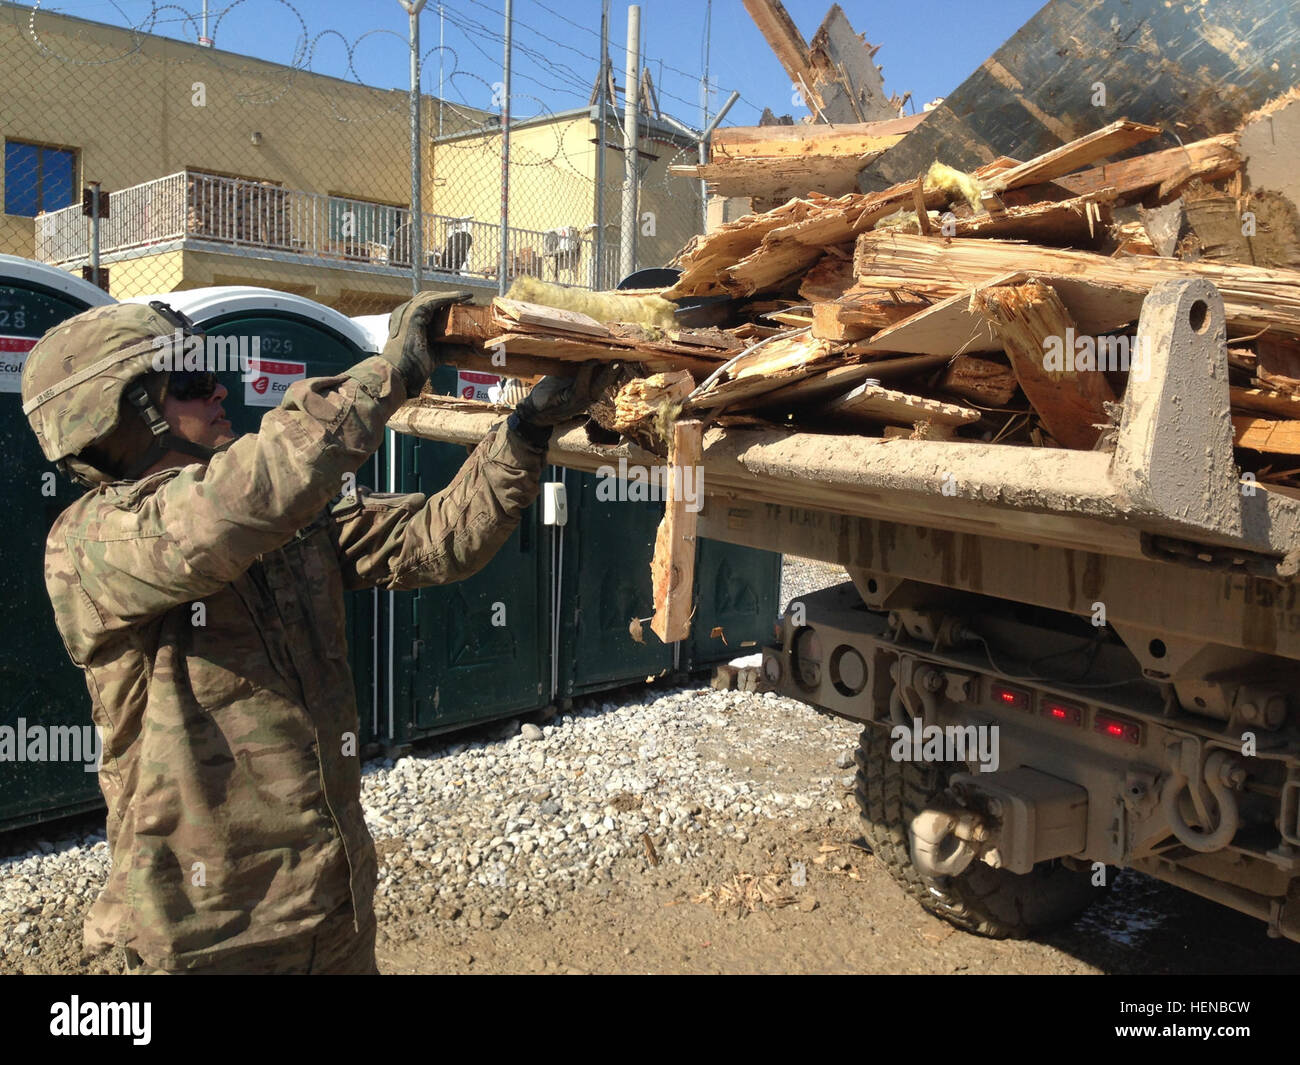 Newly promoted Pfc. Robert Barnard, a native of South Plainfield, N.J., and a horizontal construction engineer for the Hammonton, N.J.-based 150th Engineer Company, attached to the 133rd Engineer Battalion, loads debris from a torn-down job site onto a 10-ton dump truck Feb. 8 at Bagram Air Field, Afghanistan. (U.S. Army photo by Spc. Makanjuola Abimbola, 150th Engineer Company UPAR) 133rd Engineer Battalion keeps projects going on BAF 140208-A-ZZ999-721 Stock Photo